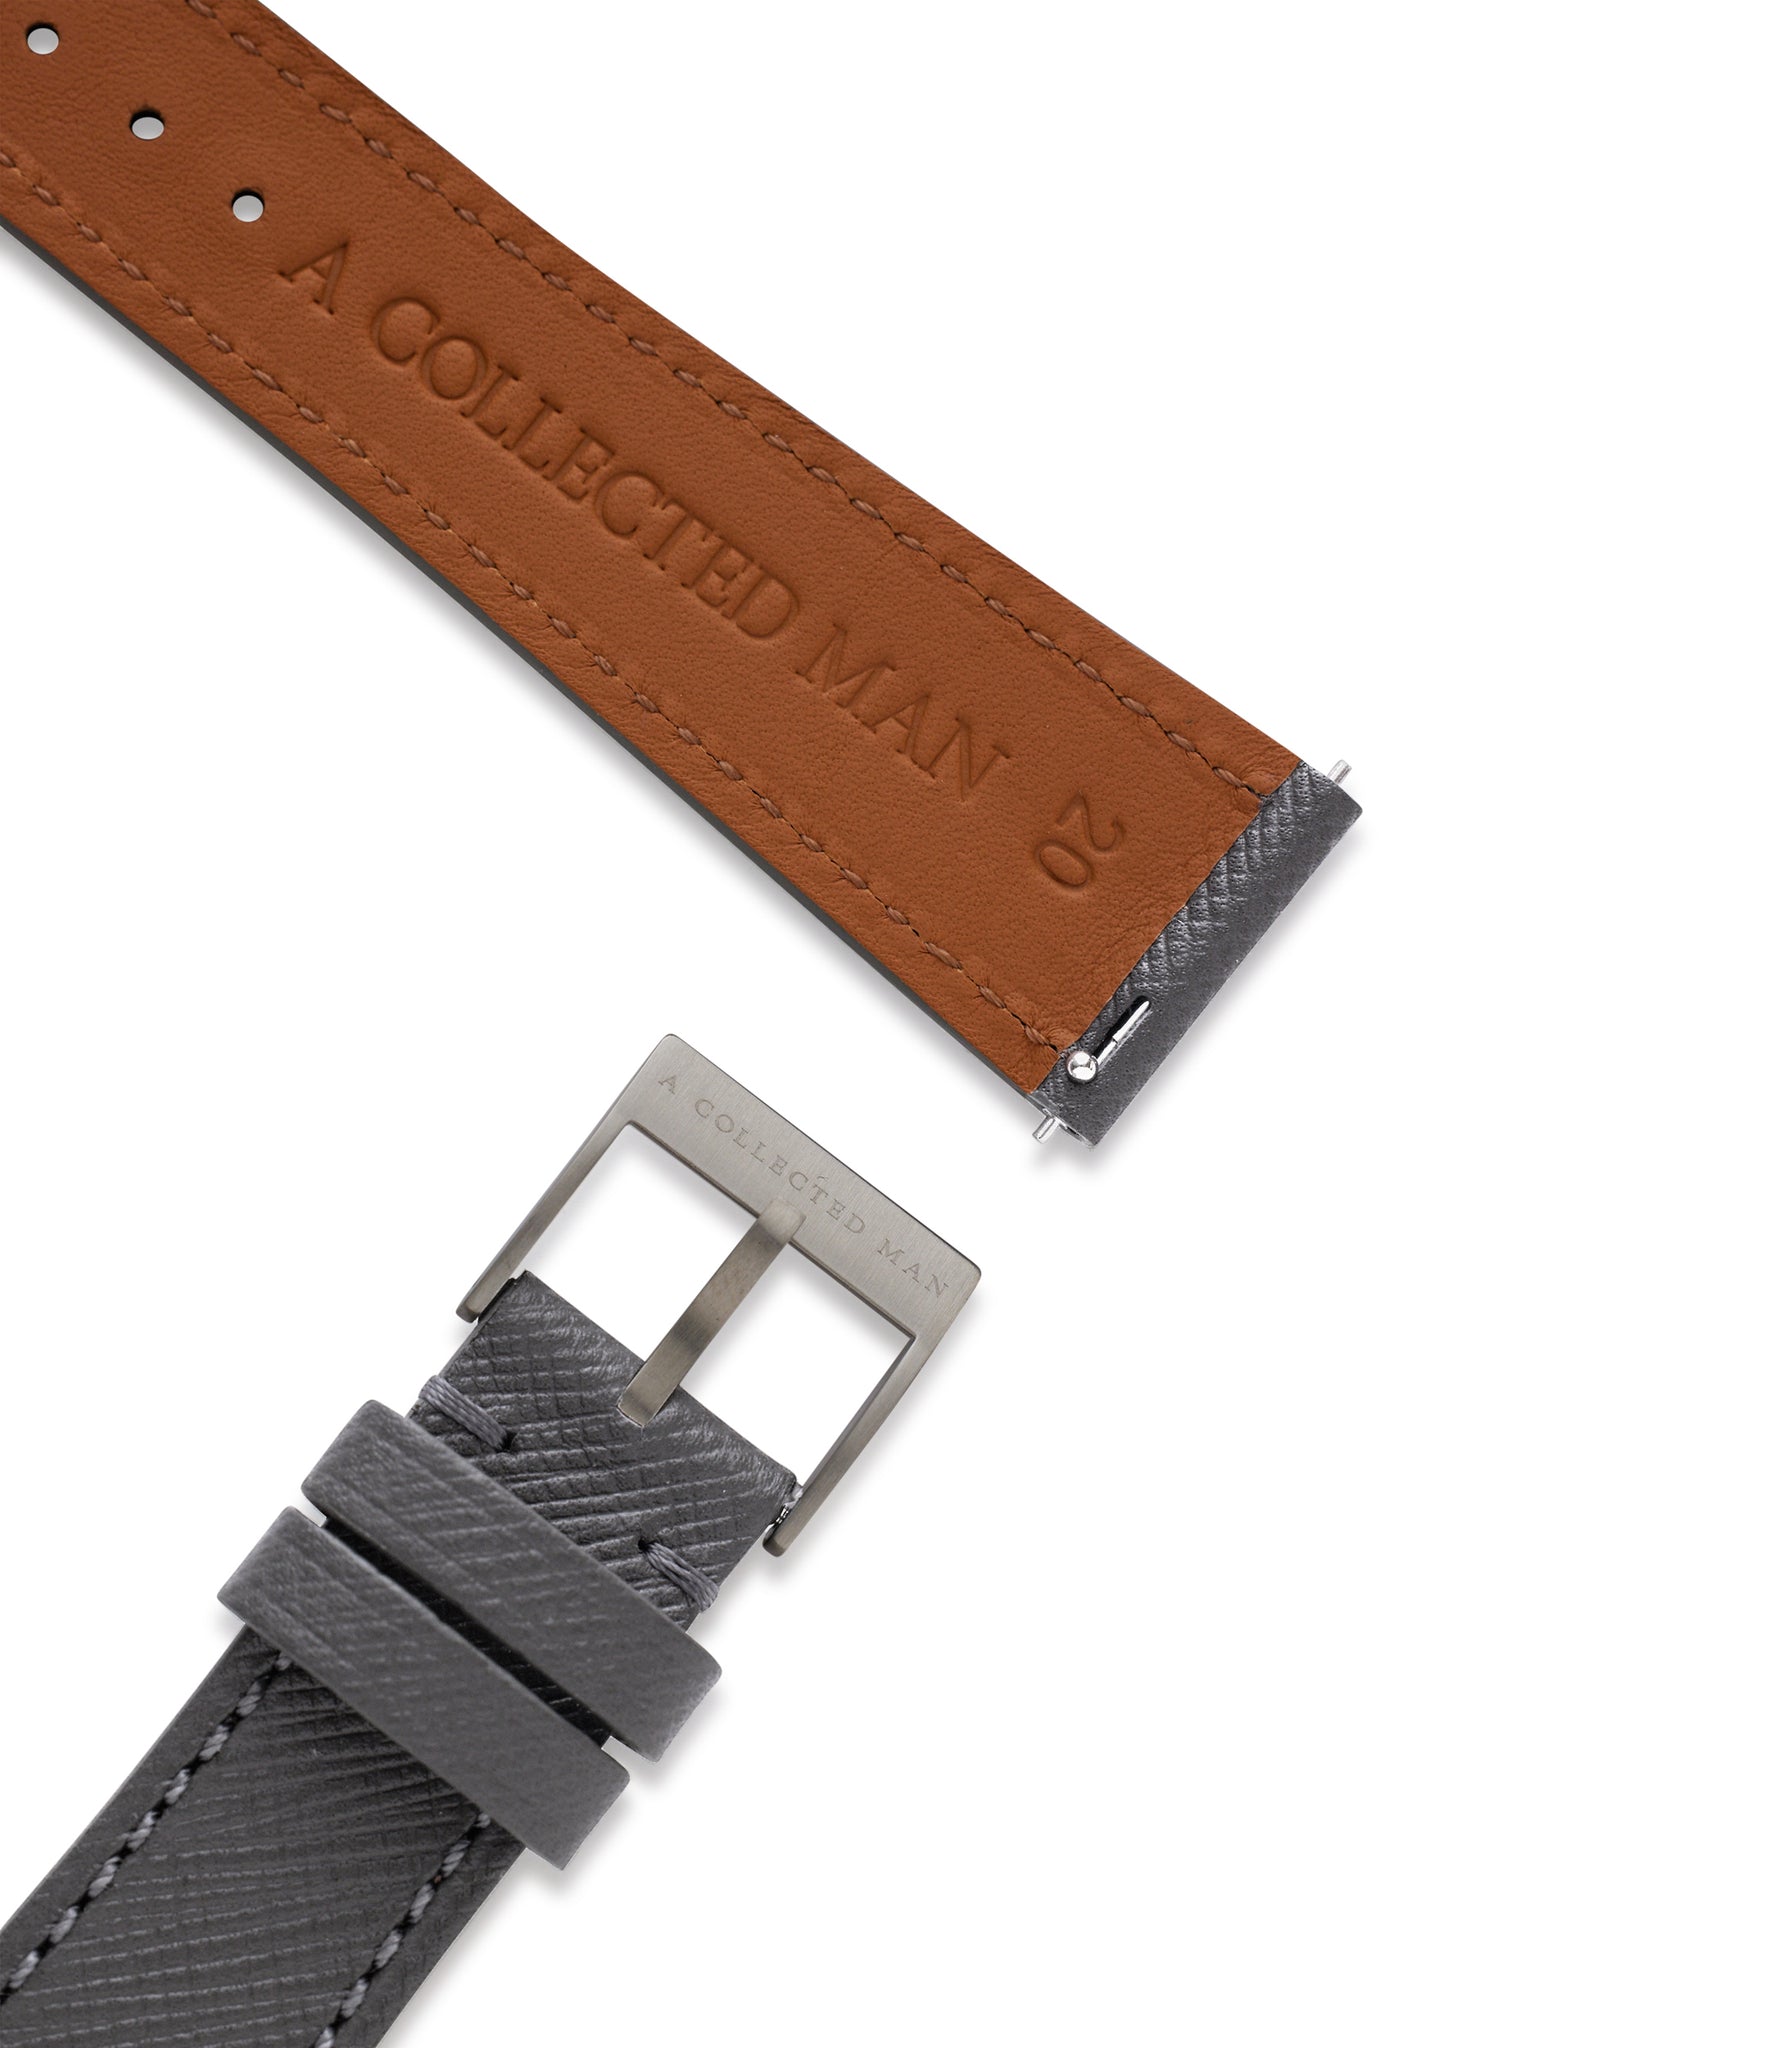 Buy saffiano quality watch strap in smoky quartz grey from A Collected Man London, in short or regular lengths. We are proud to offer these hand-crafted watch straps, thoughtfully made in Europe, to suit your watch. Available to order online for worldwide delivery.